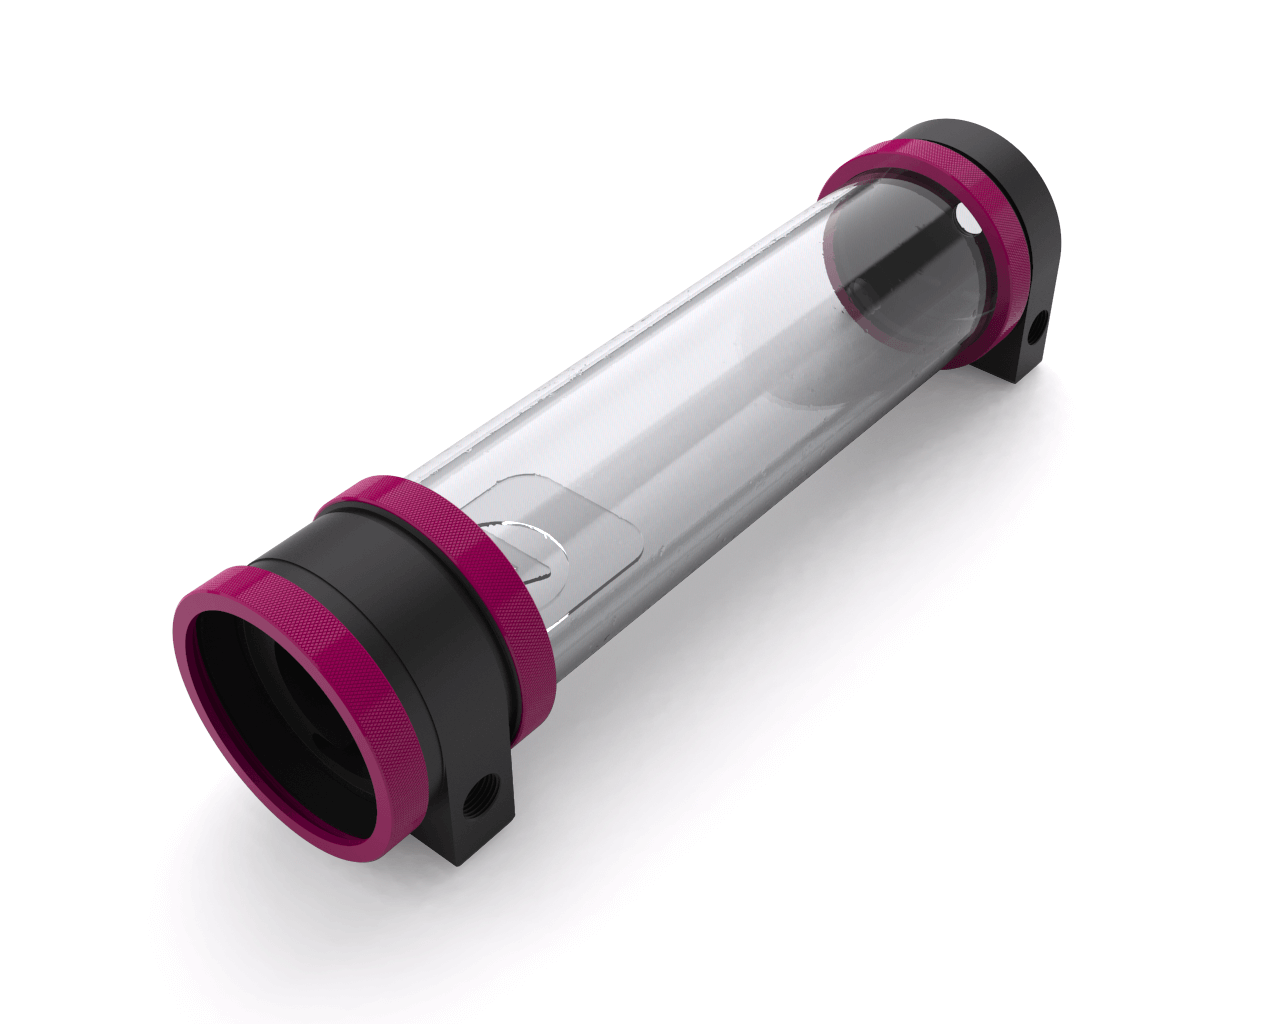 PrimoChill CTR Hard Mount Phase II High Flow D5 Enabled Reservoir - Black POM - 240mm - PrimoChill - KEEPING IT COOL Magenta